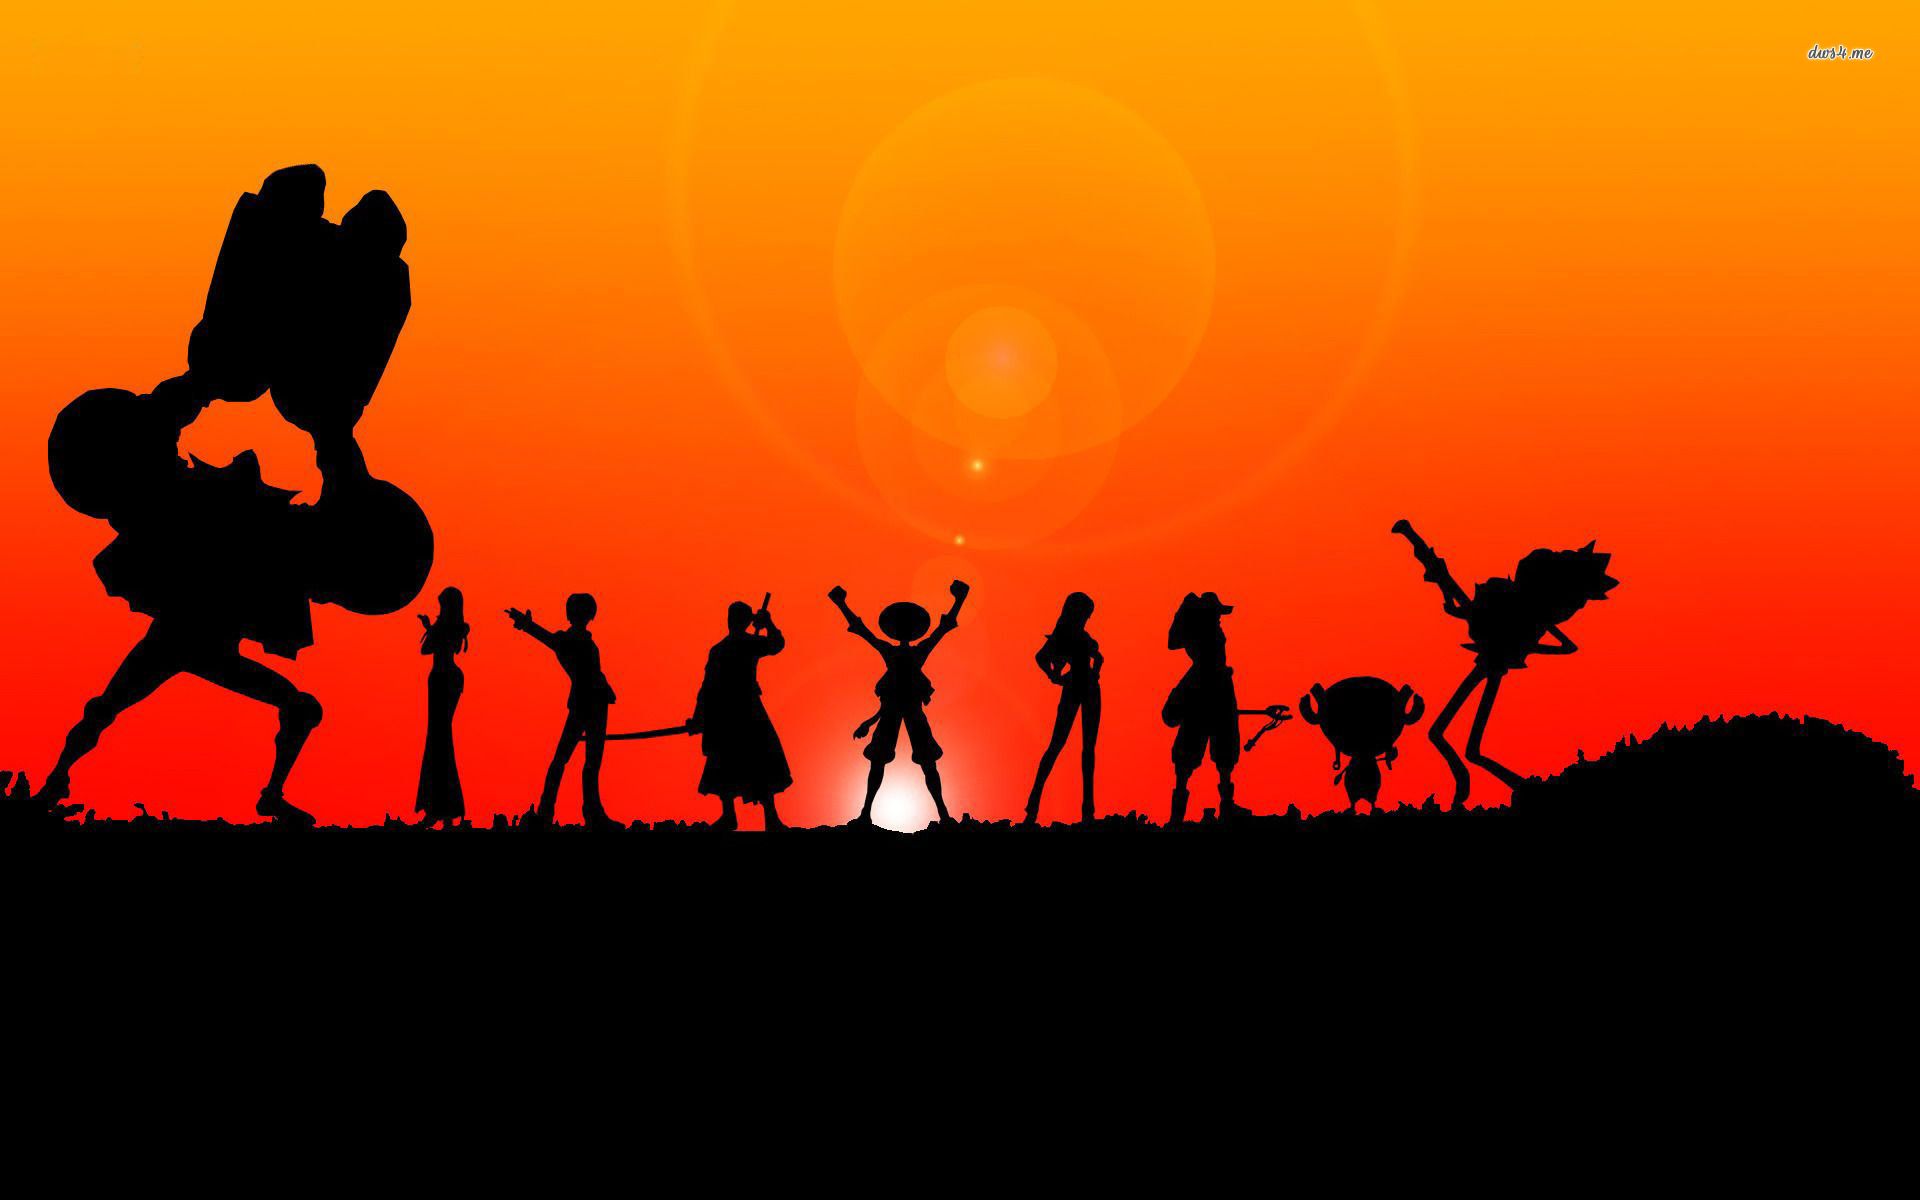 One Piece silhouettes wallpaper - Anime wallpapers